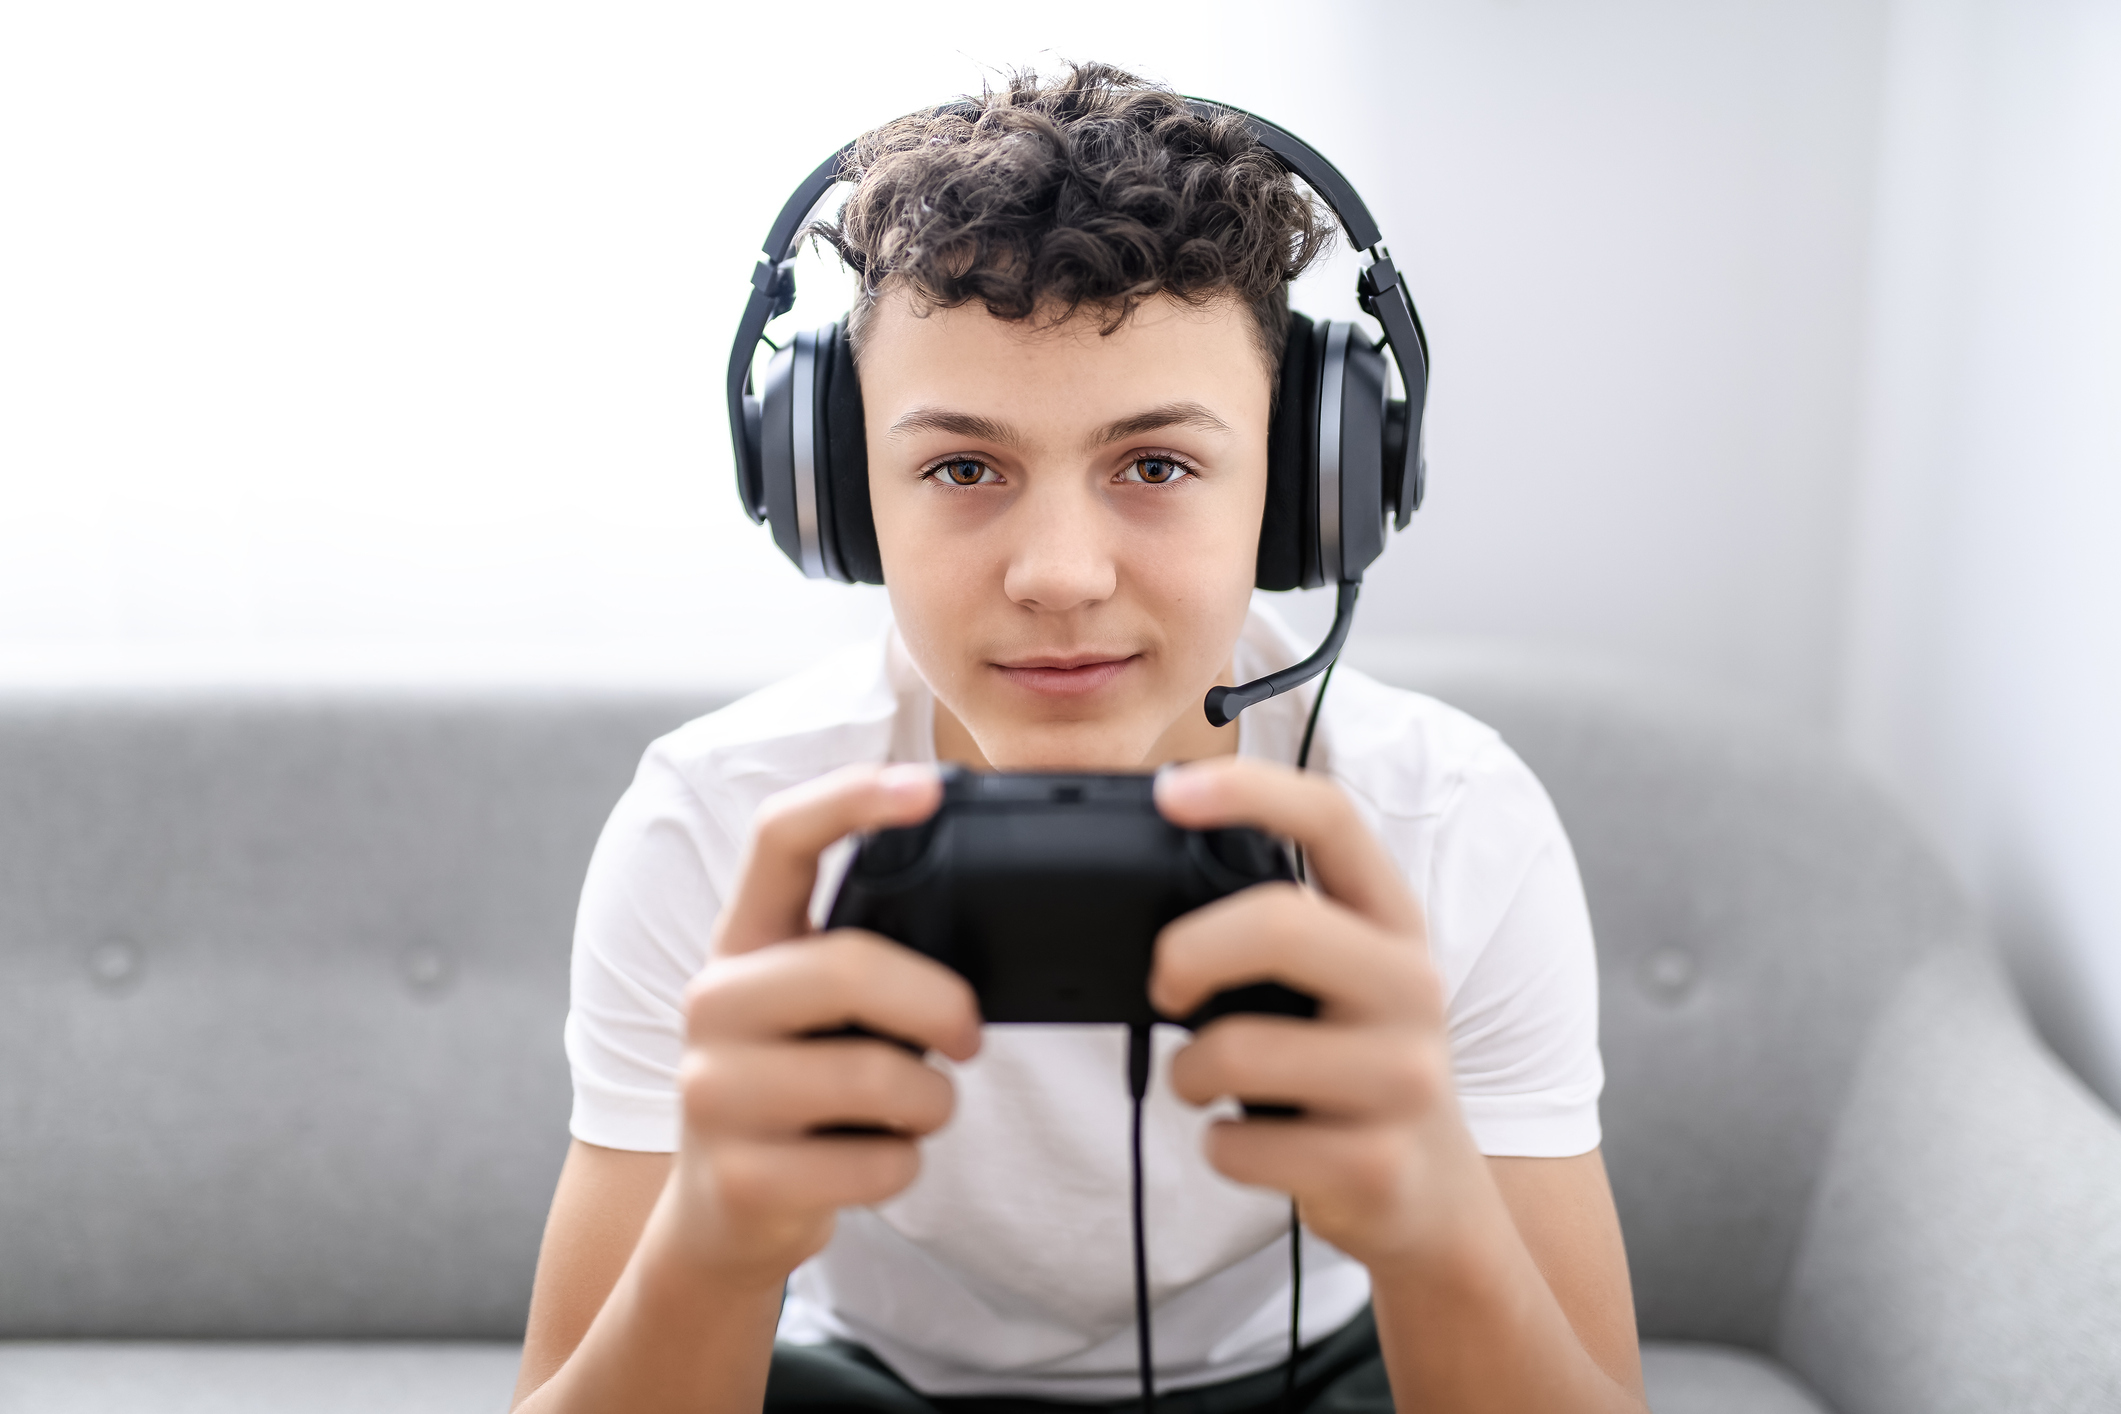 benefits-of-playing-video-games-with-friends.